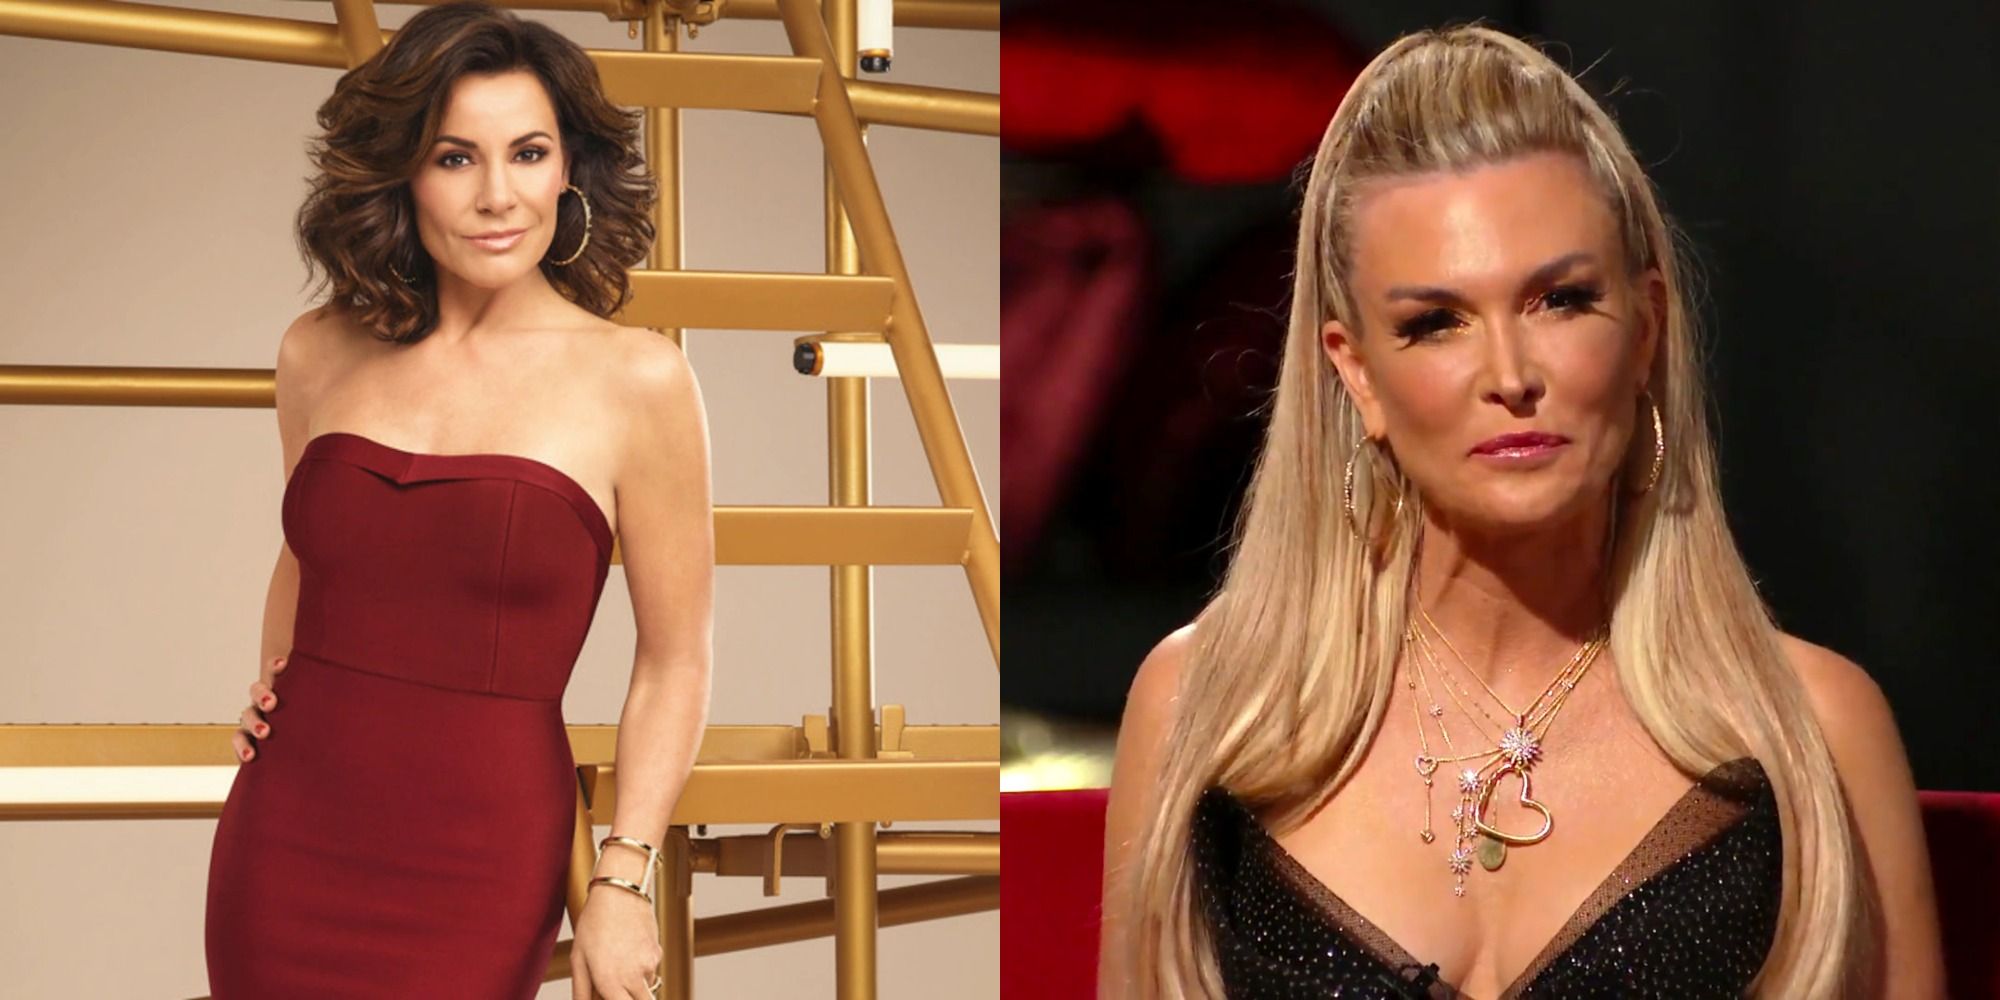 Split image showing Luann de Lesseps and Tinsley Mortimer in RHONY